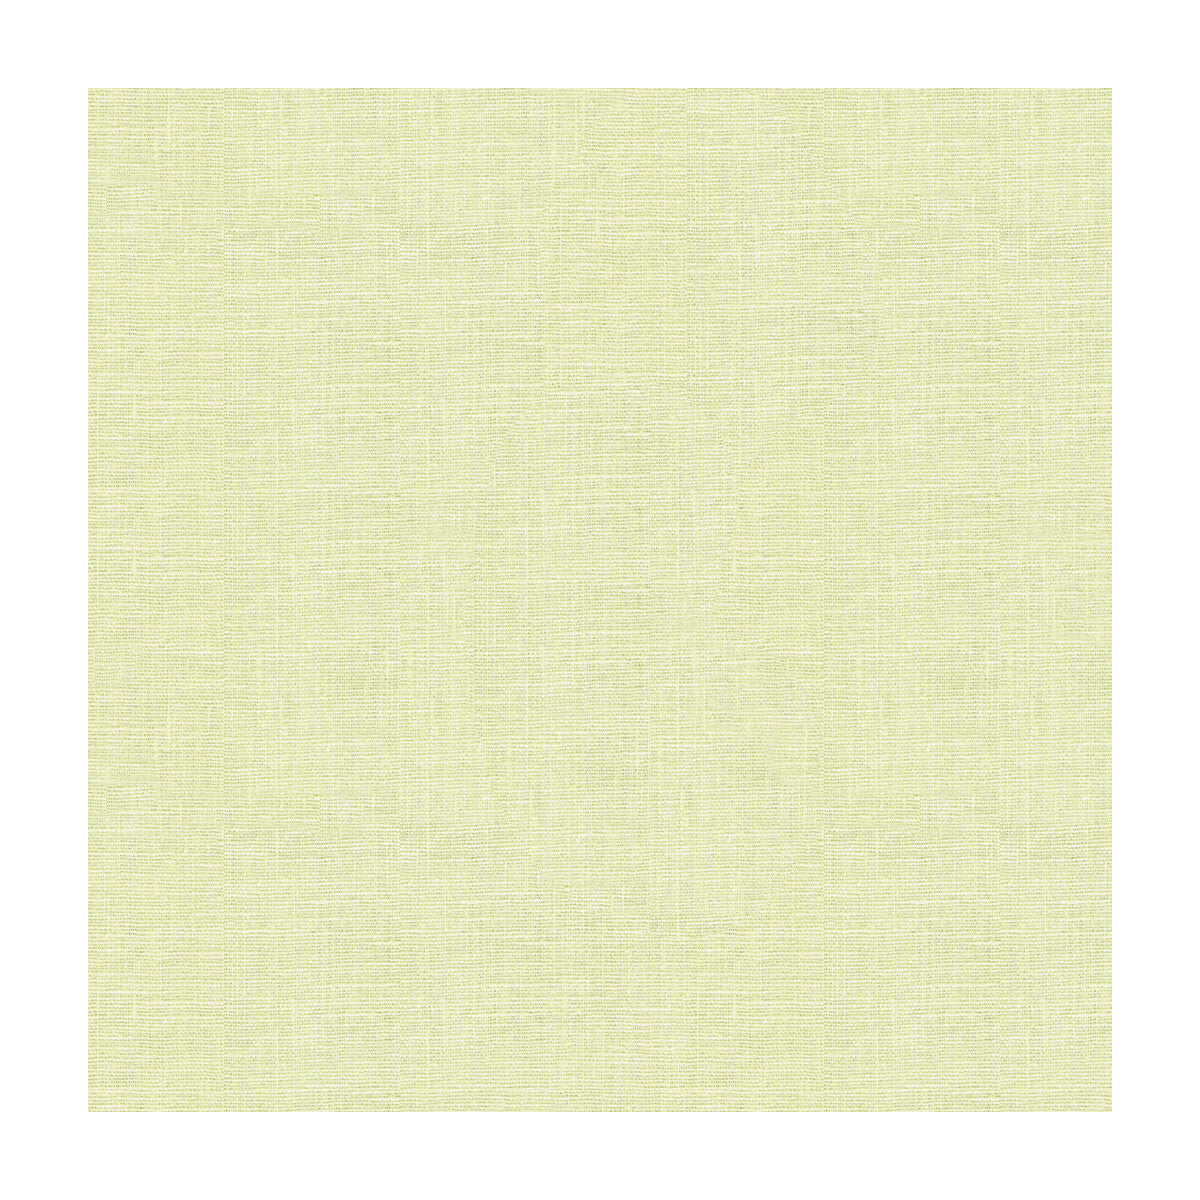 Dublin fabric in rain color - pattern 32344.511.0 - by Kravet Basics in the Perfect Plains collection